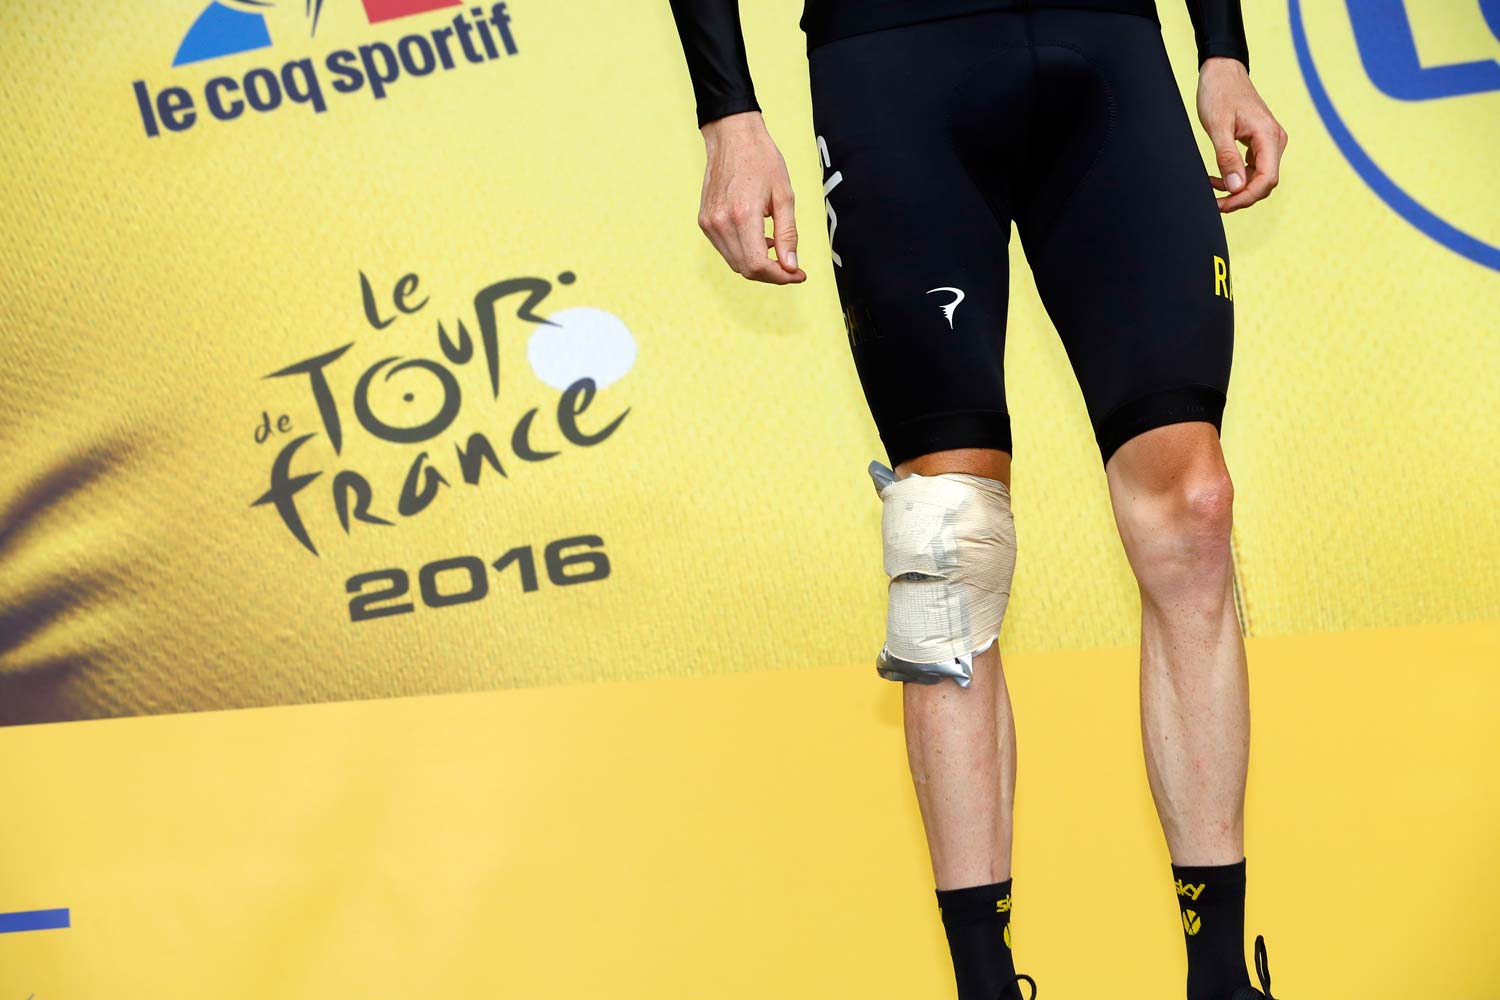 Wounded but walking... Chris Froome had a scare with a crash in stage 19 but he retains a solid lead on GC. Photo: Graham Watson